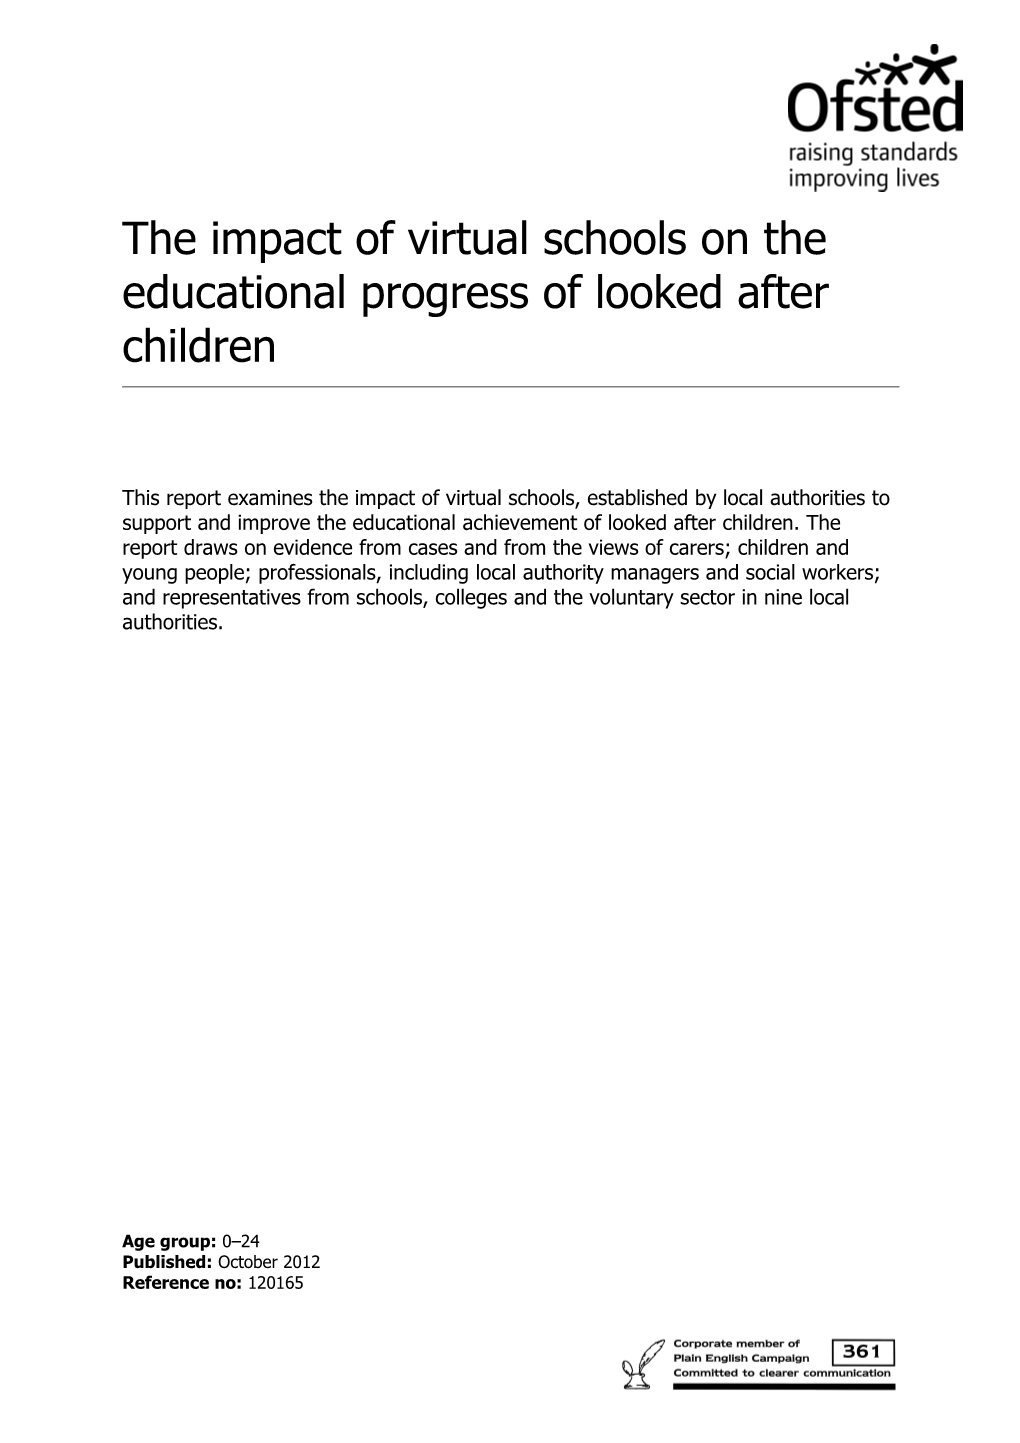 The Impact of Virtual Schools on the Educational Progress of Looked After Children